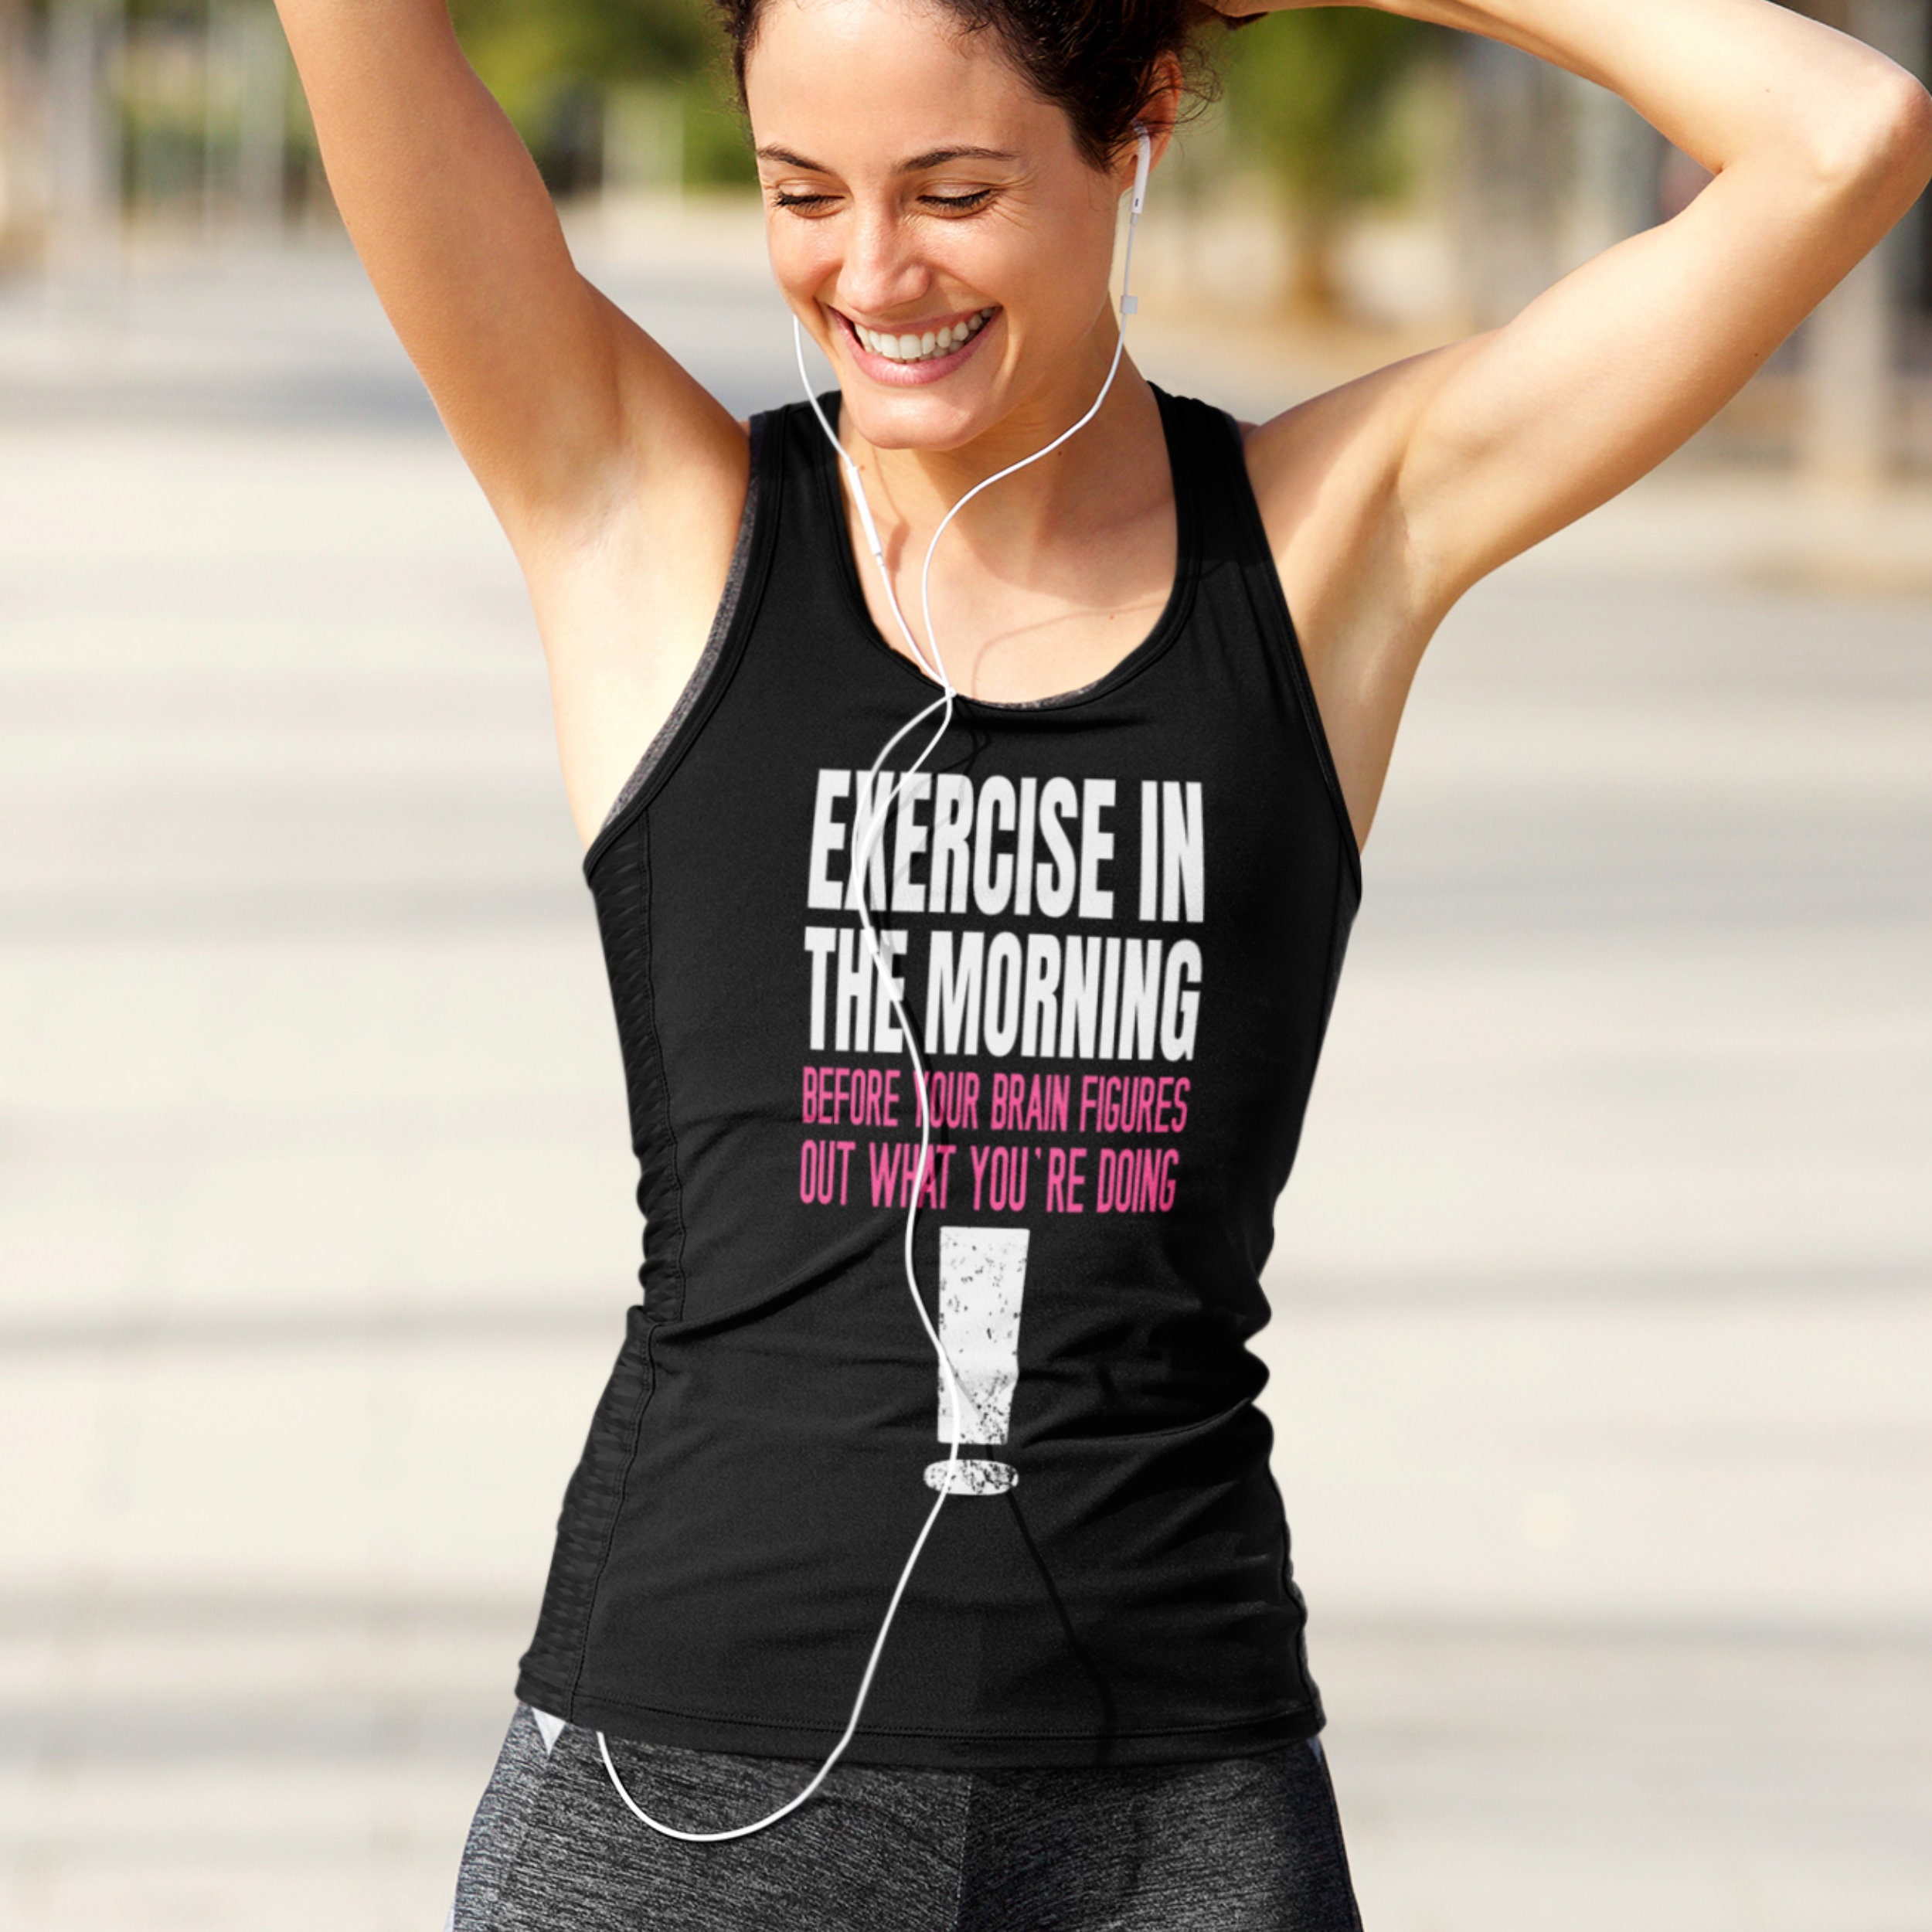 Funny Workout Tanks for Ladies, Fitness Shirt for Women, Workout Shirts,  Exercise Shirt, Gift for Women 